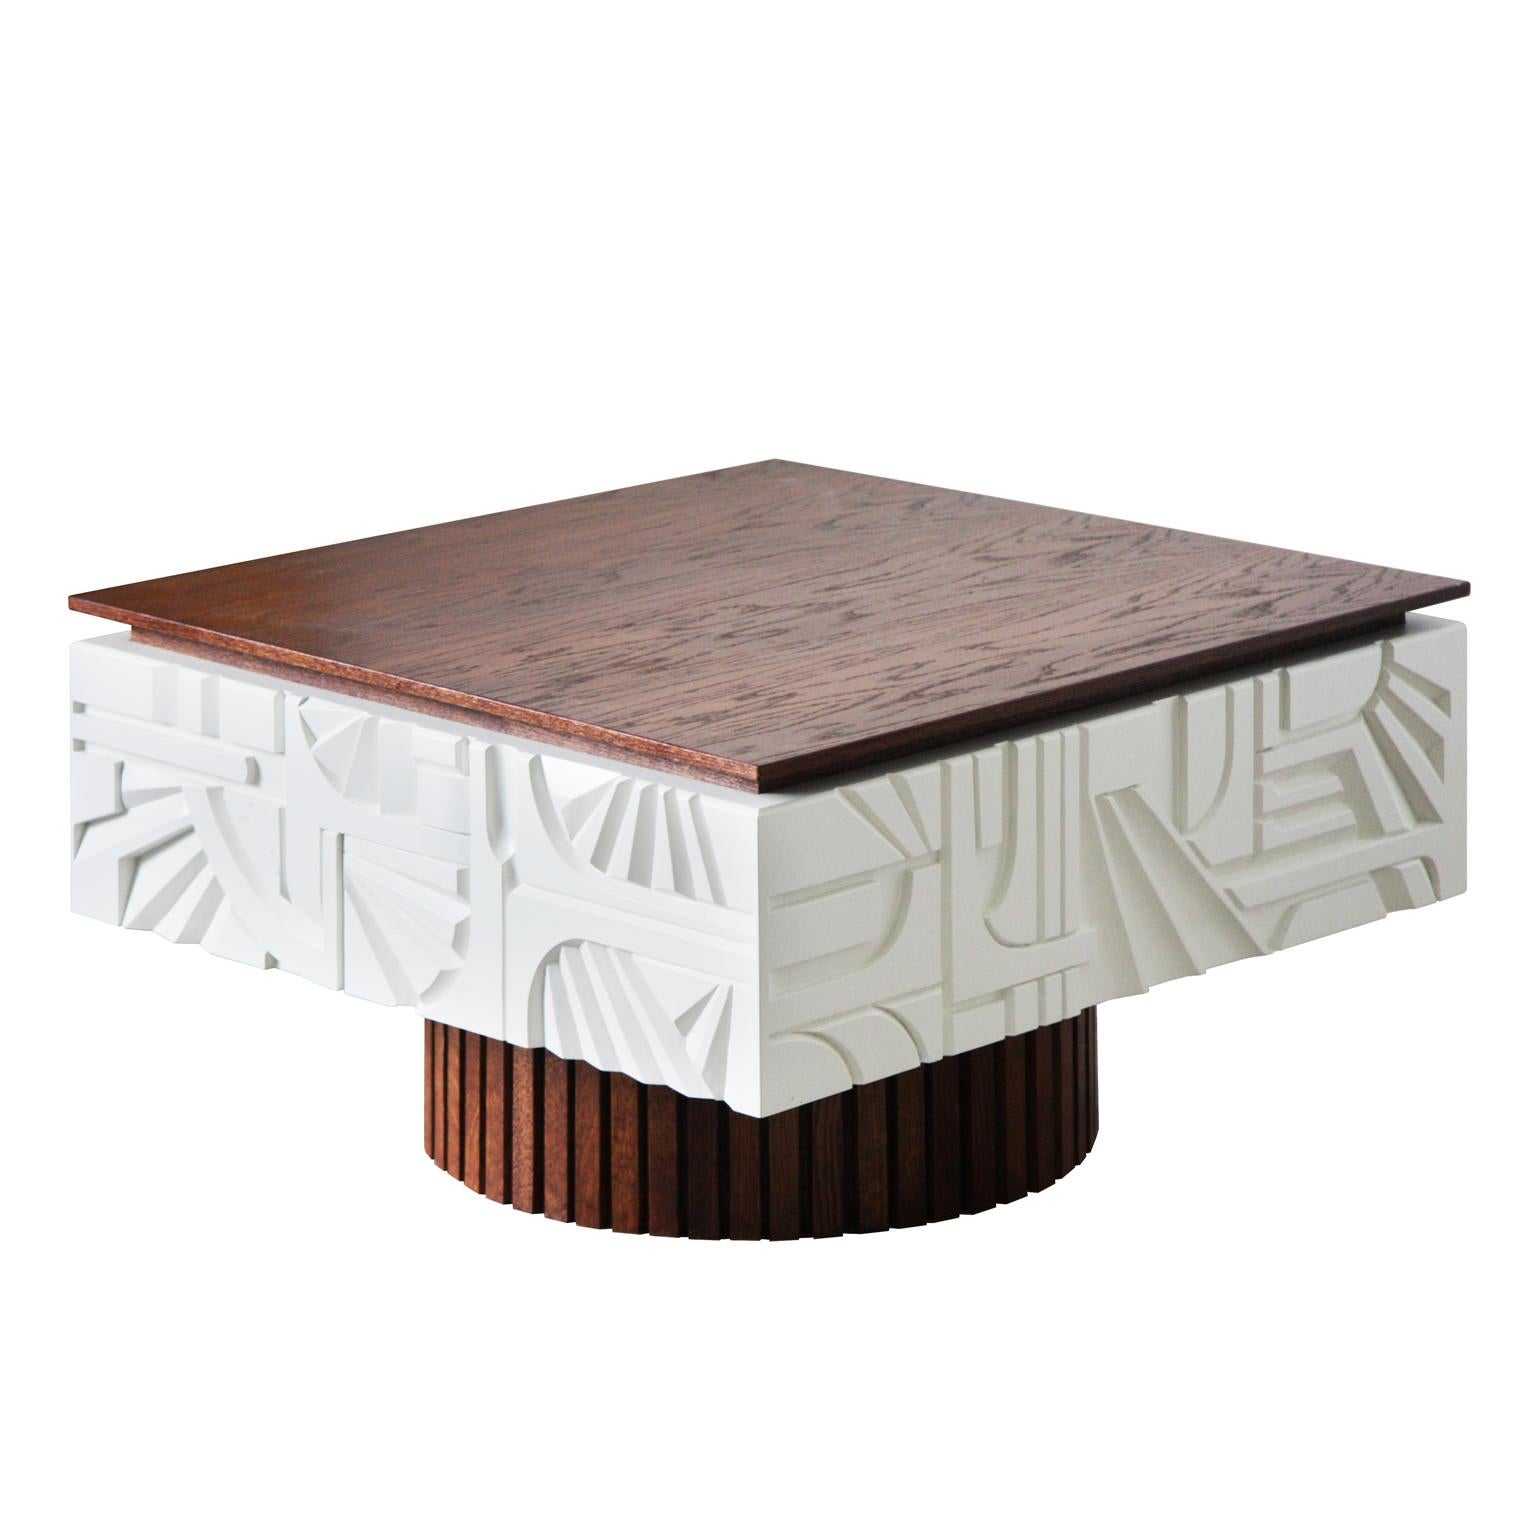 This wooden coffee table was created as a part of the 